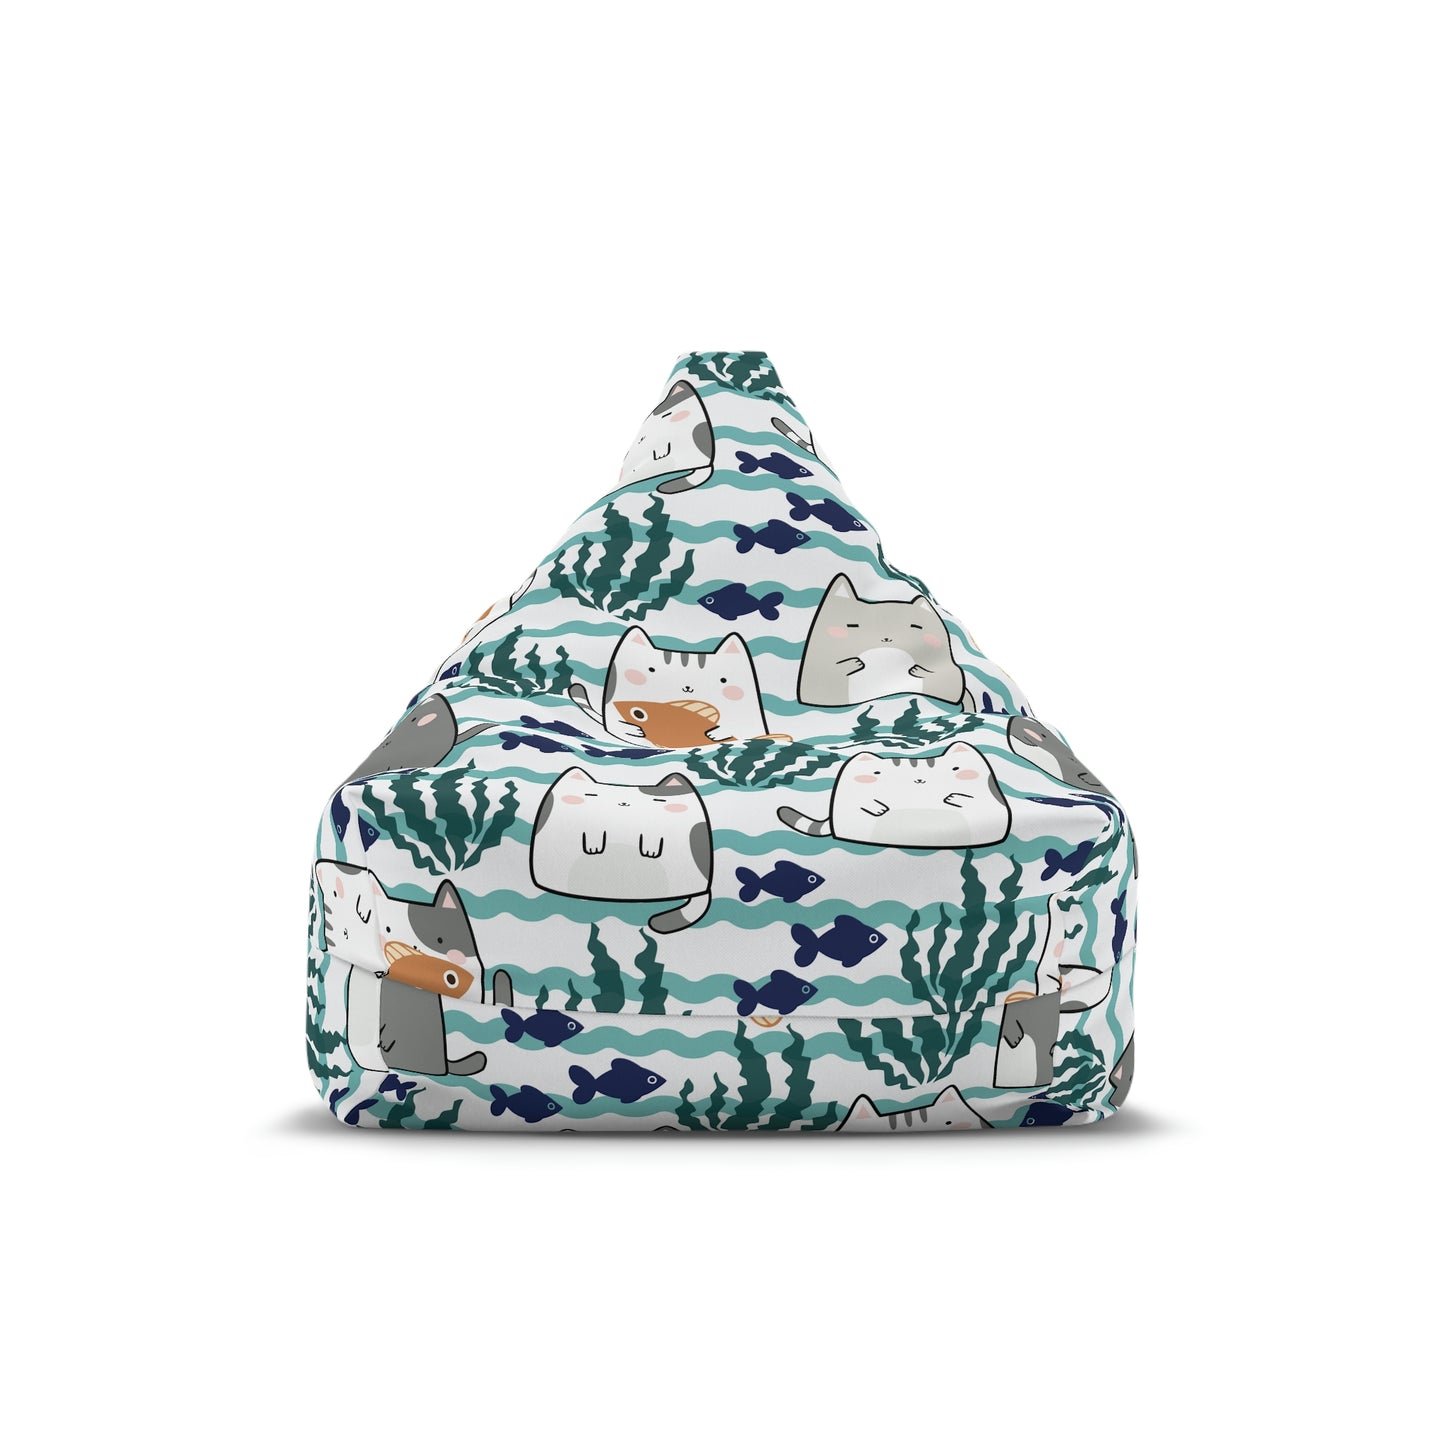 Kawaii Cats and Fishes Bean Bag Chair Cover